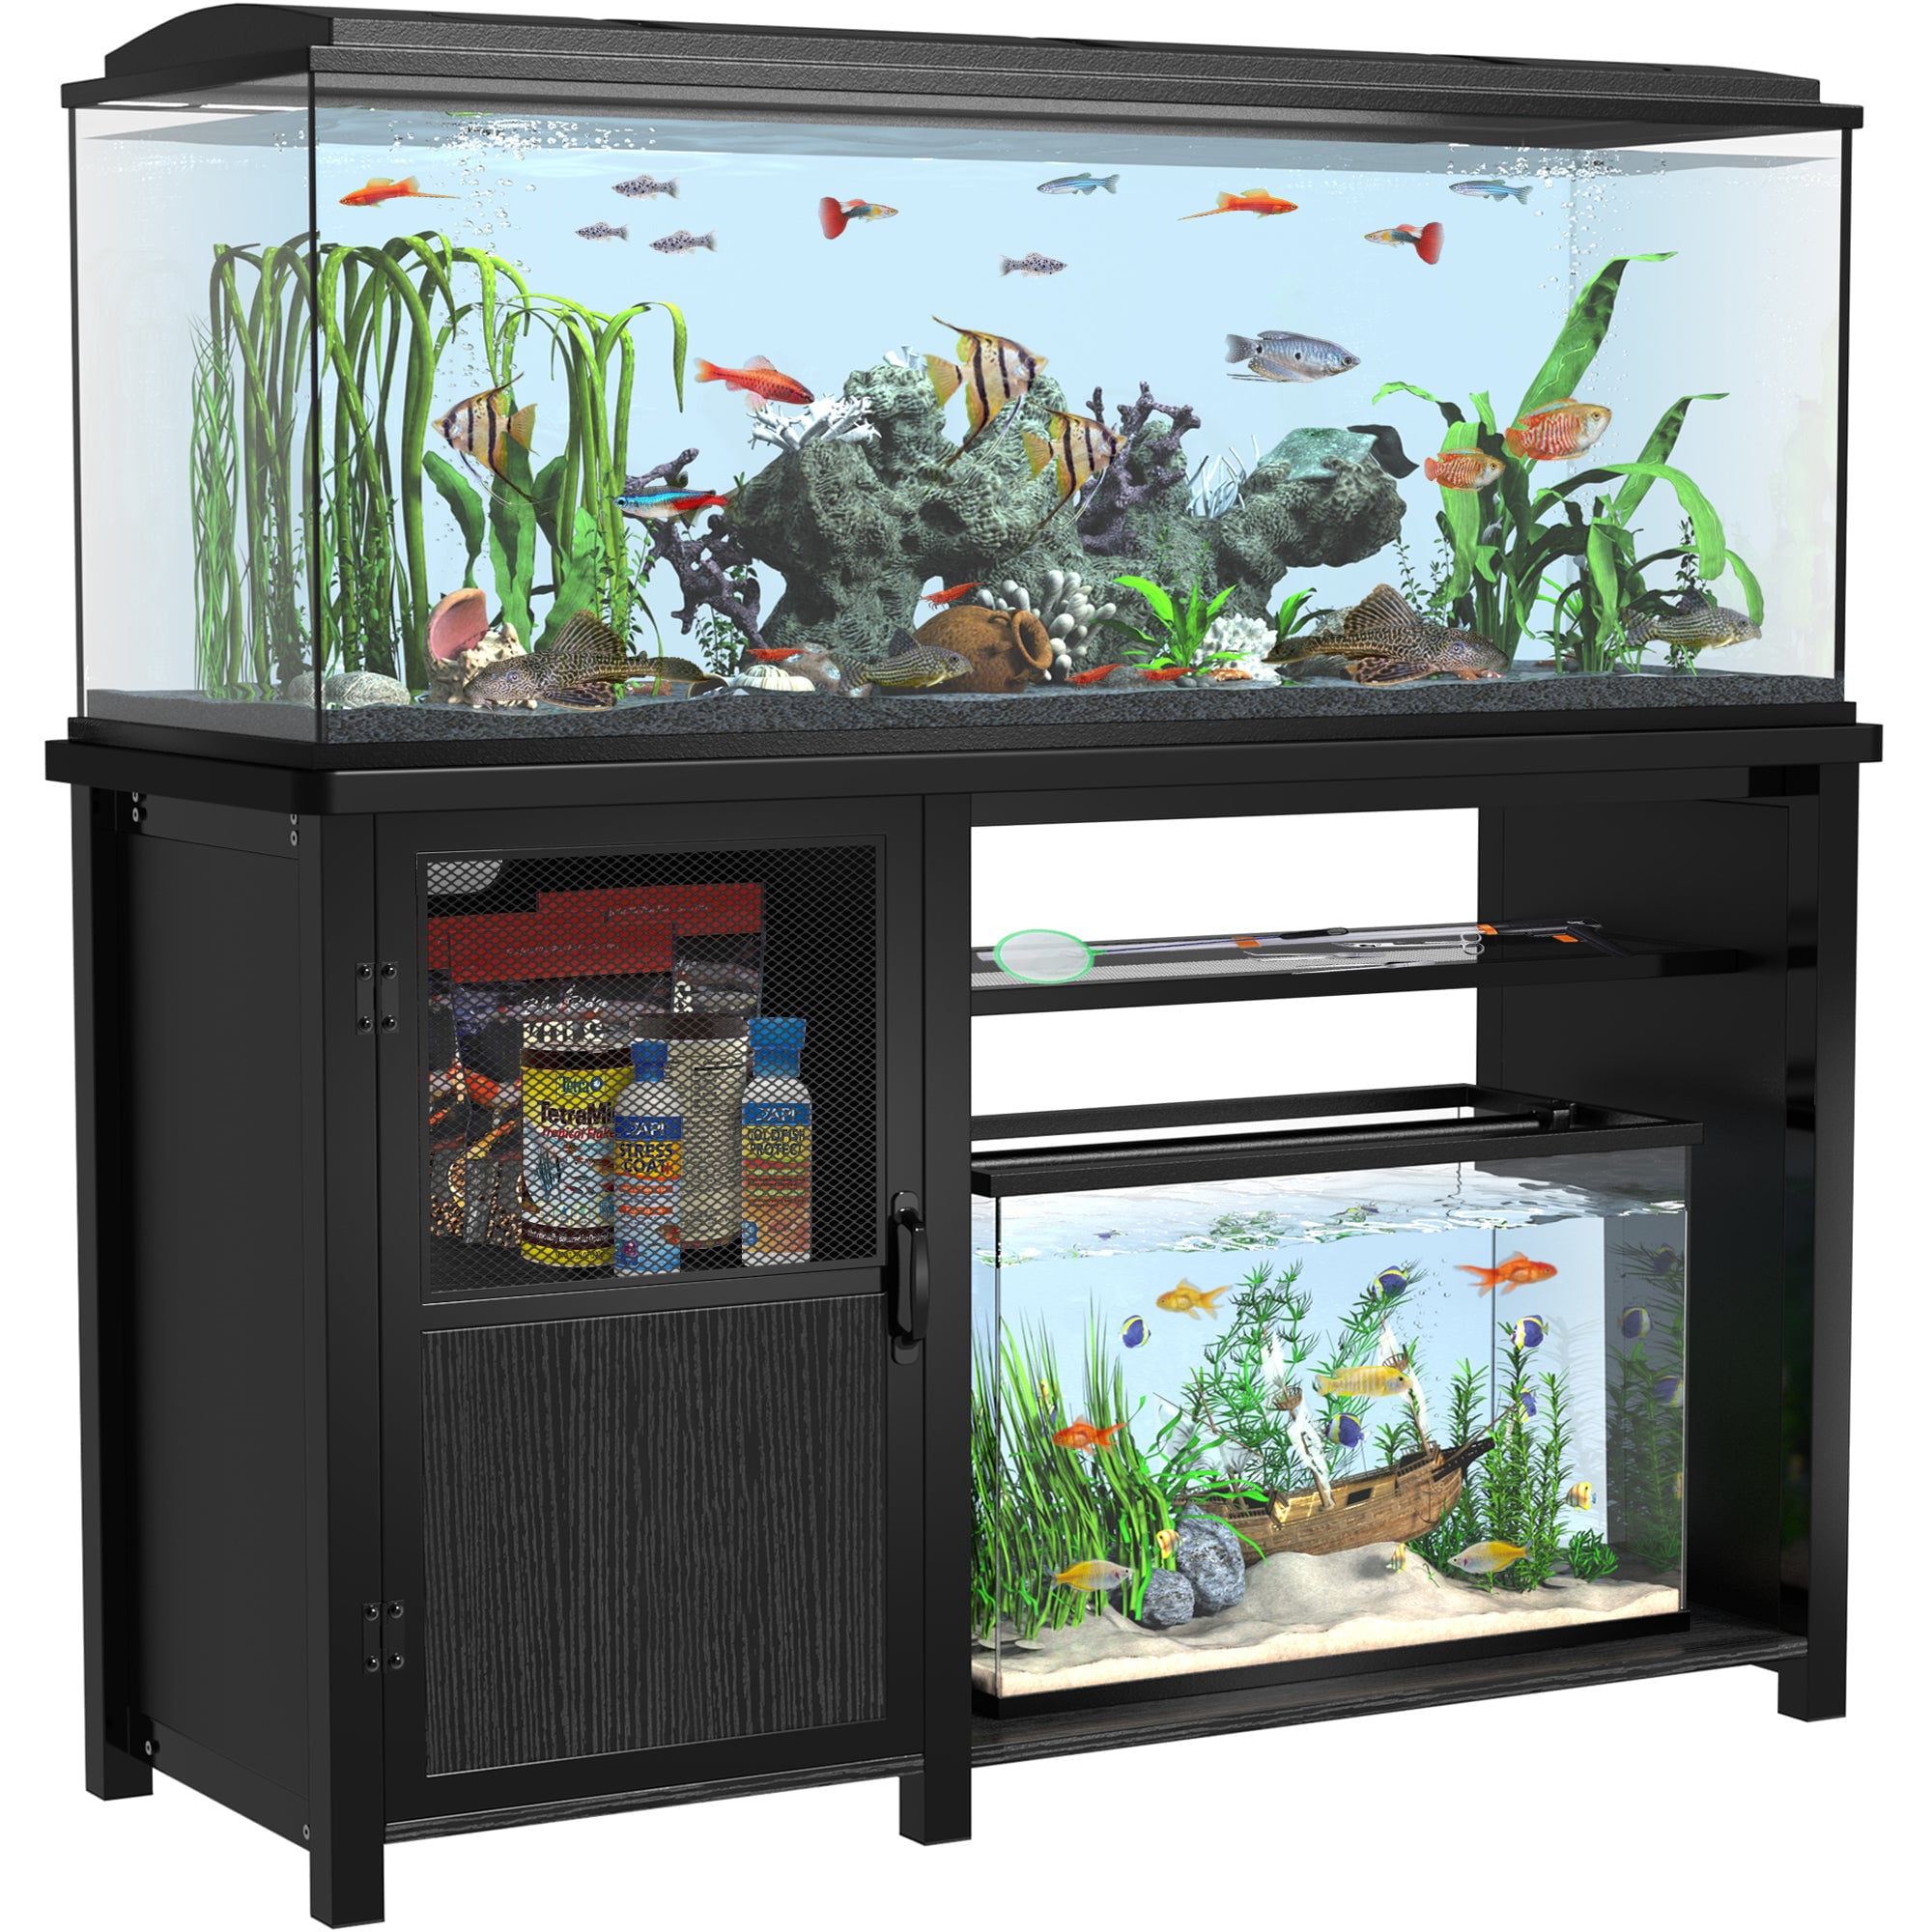 55-75 Gallon Fish Tank Stand Heavy Duty Metal Aquarium Stand with Cabinet，52